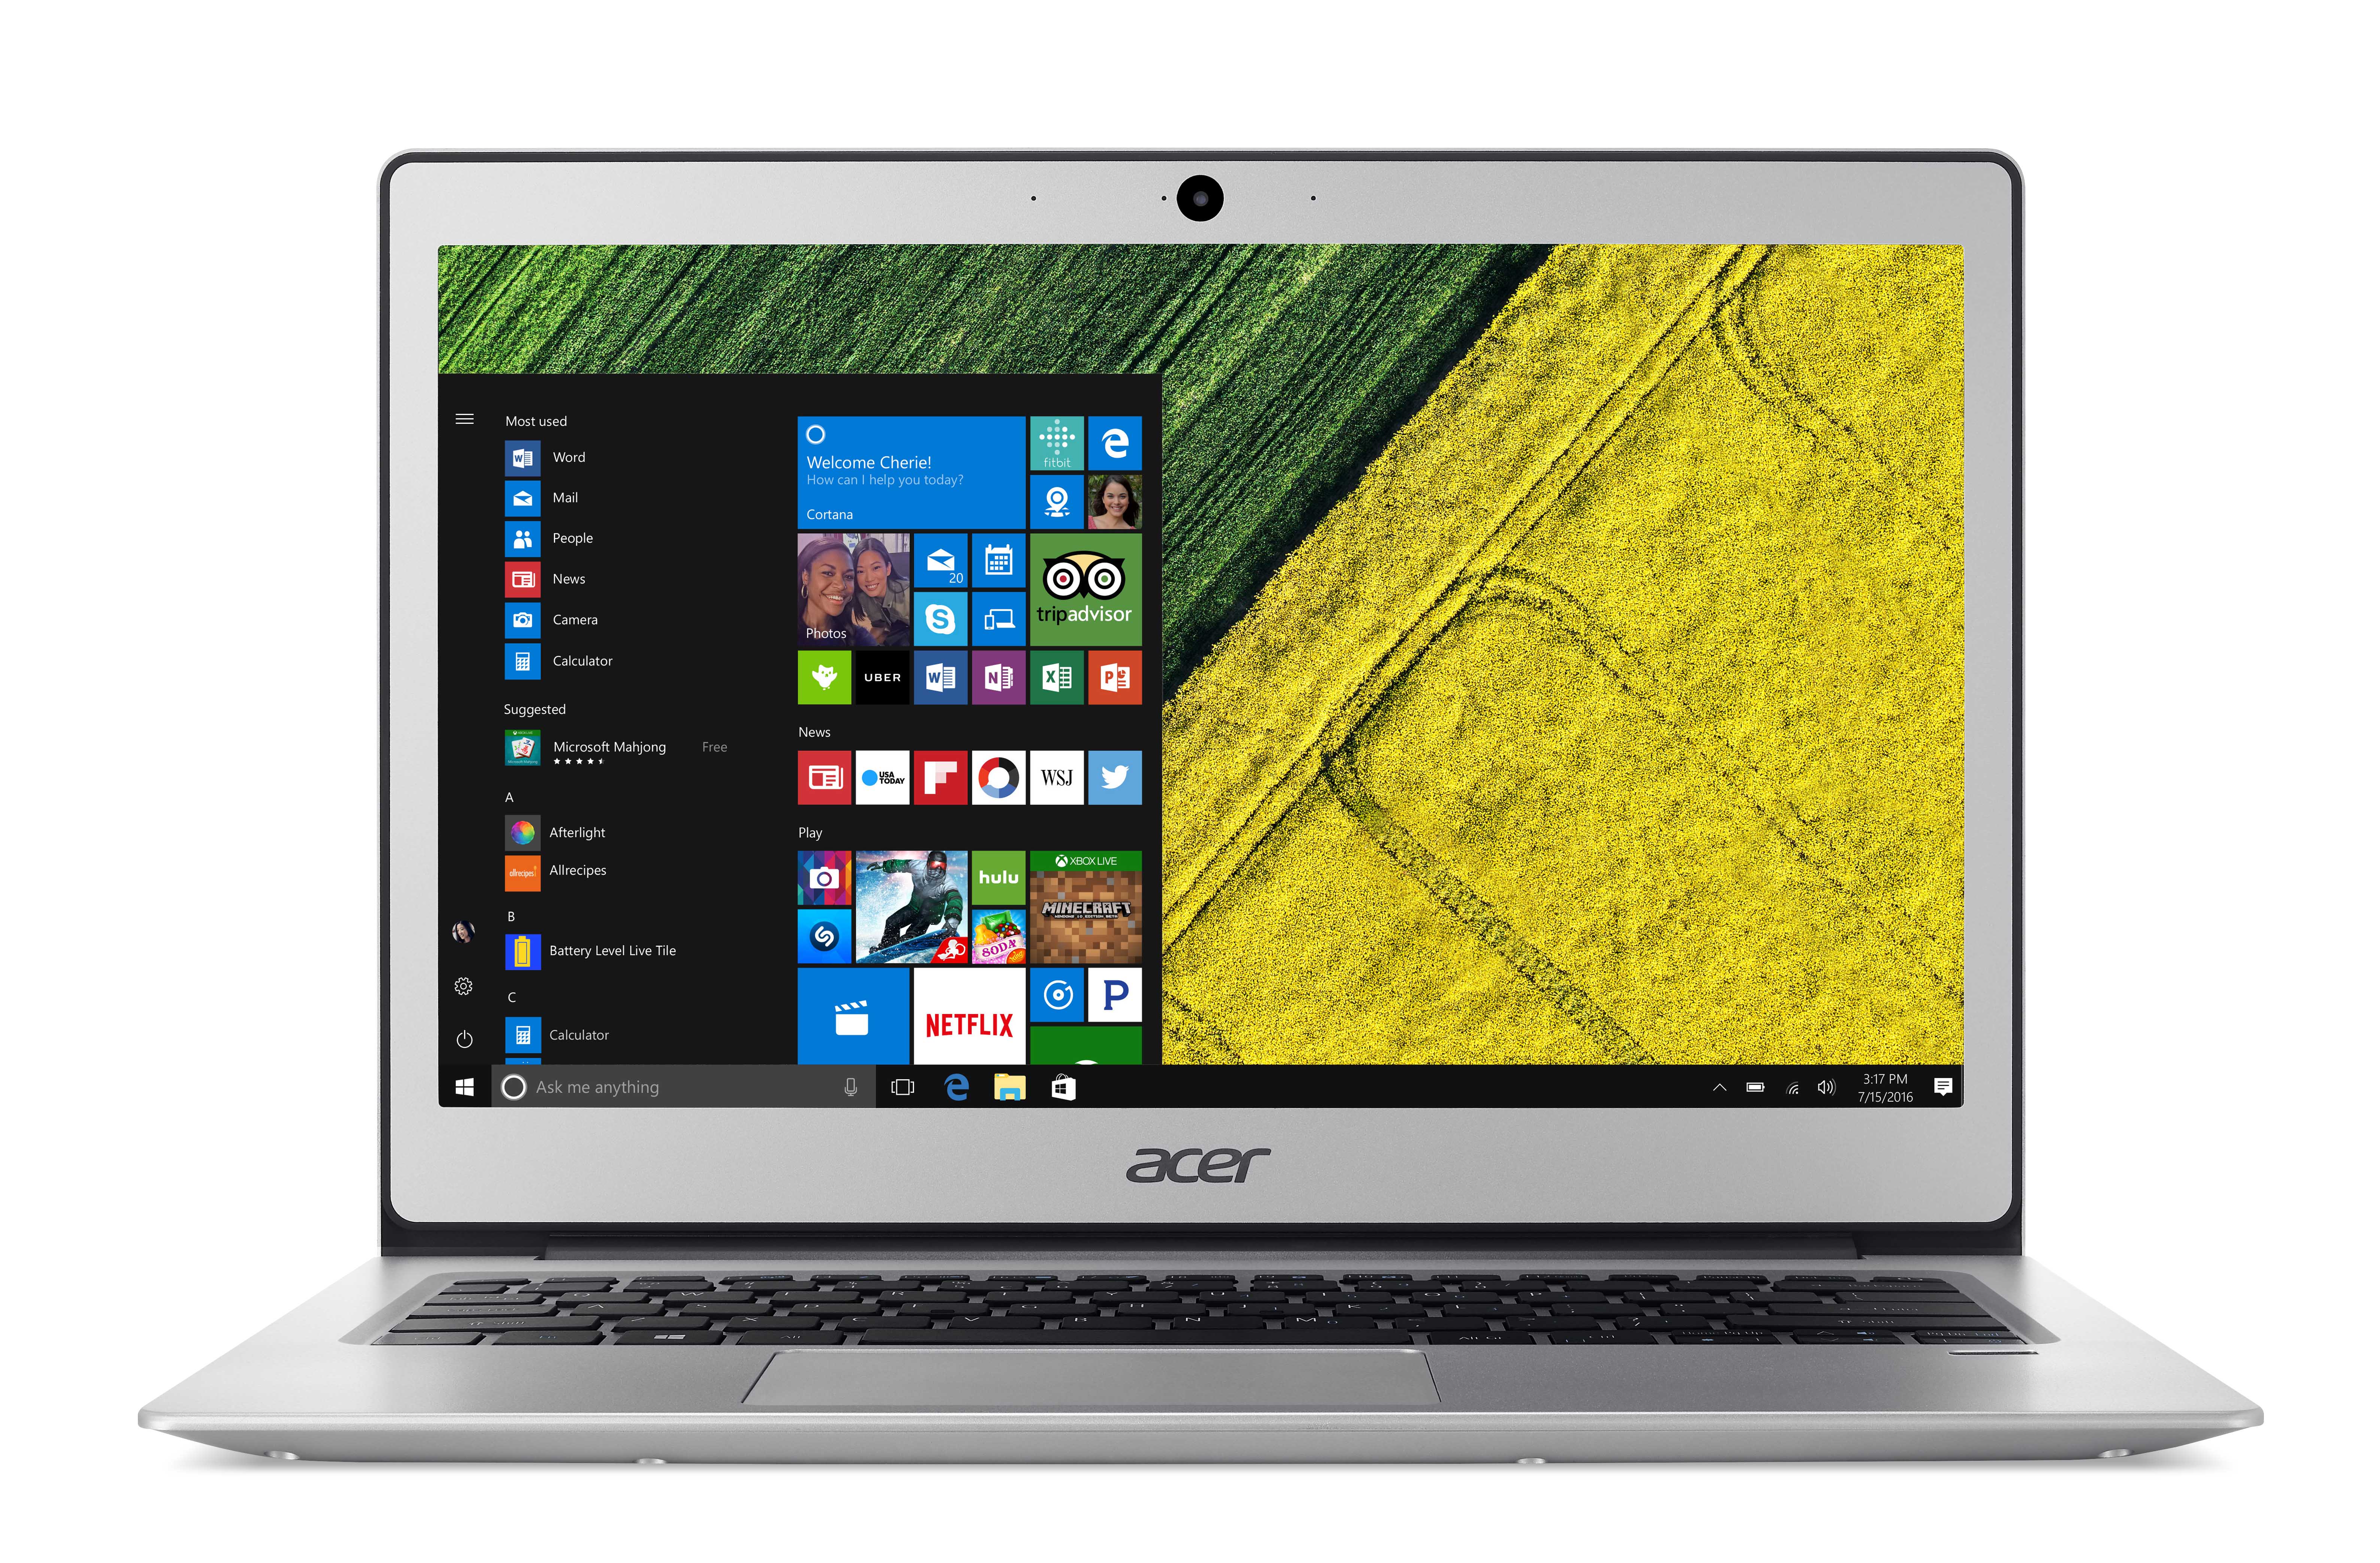 The Acer Swift 1 with Windows 10